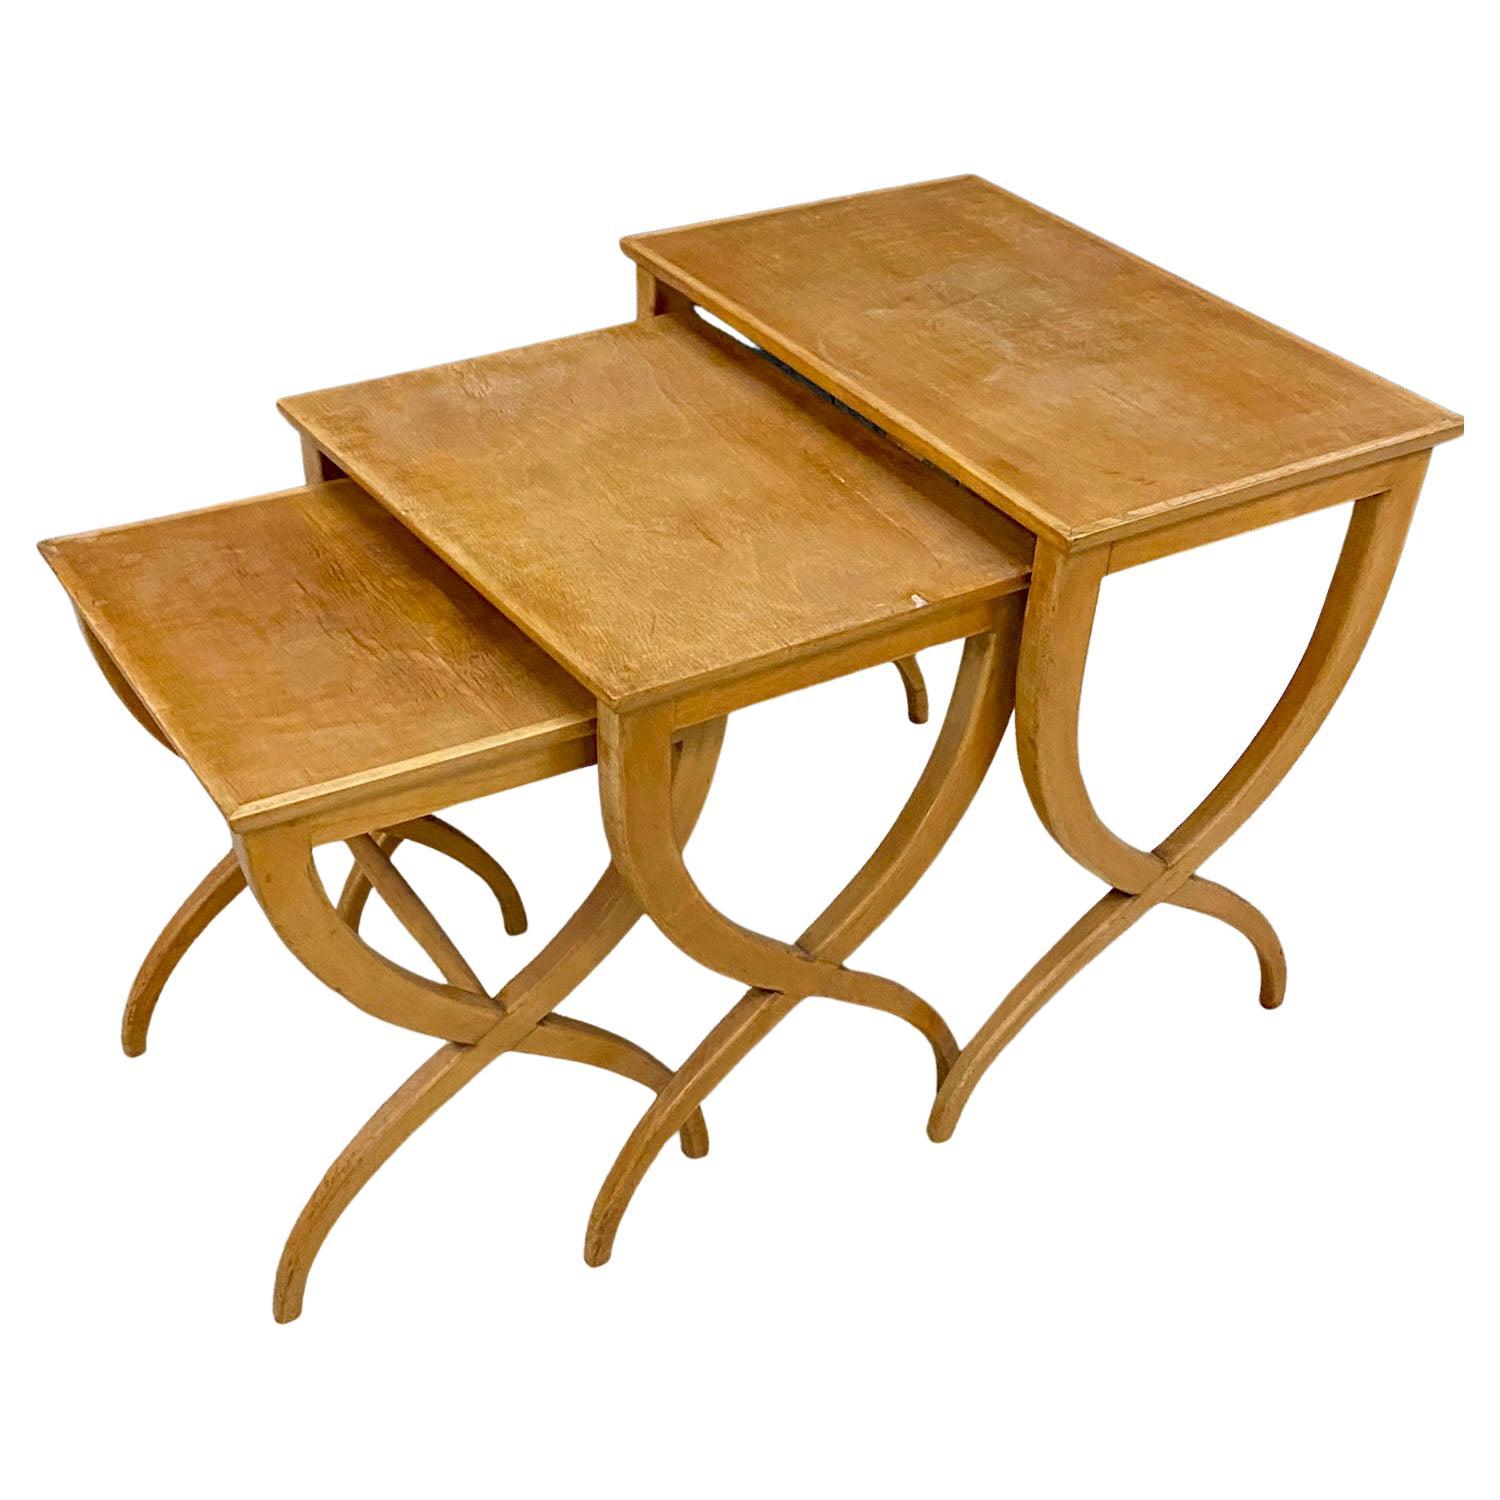 3 nesting tables in stained beech circa 1940/1950